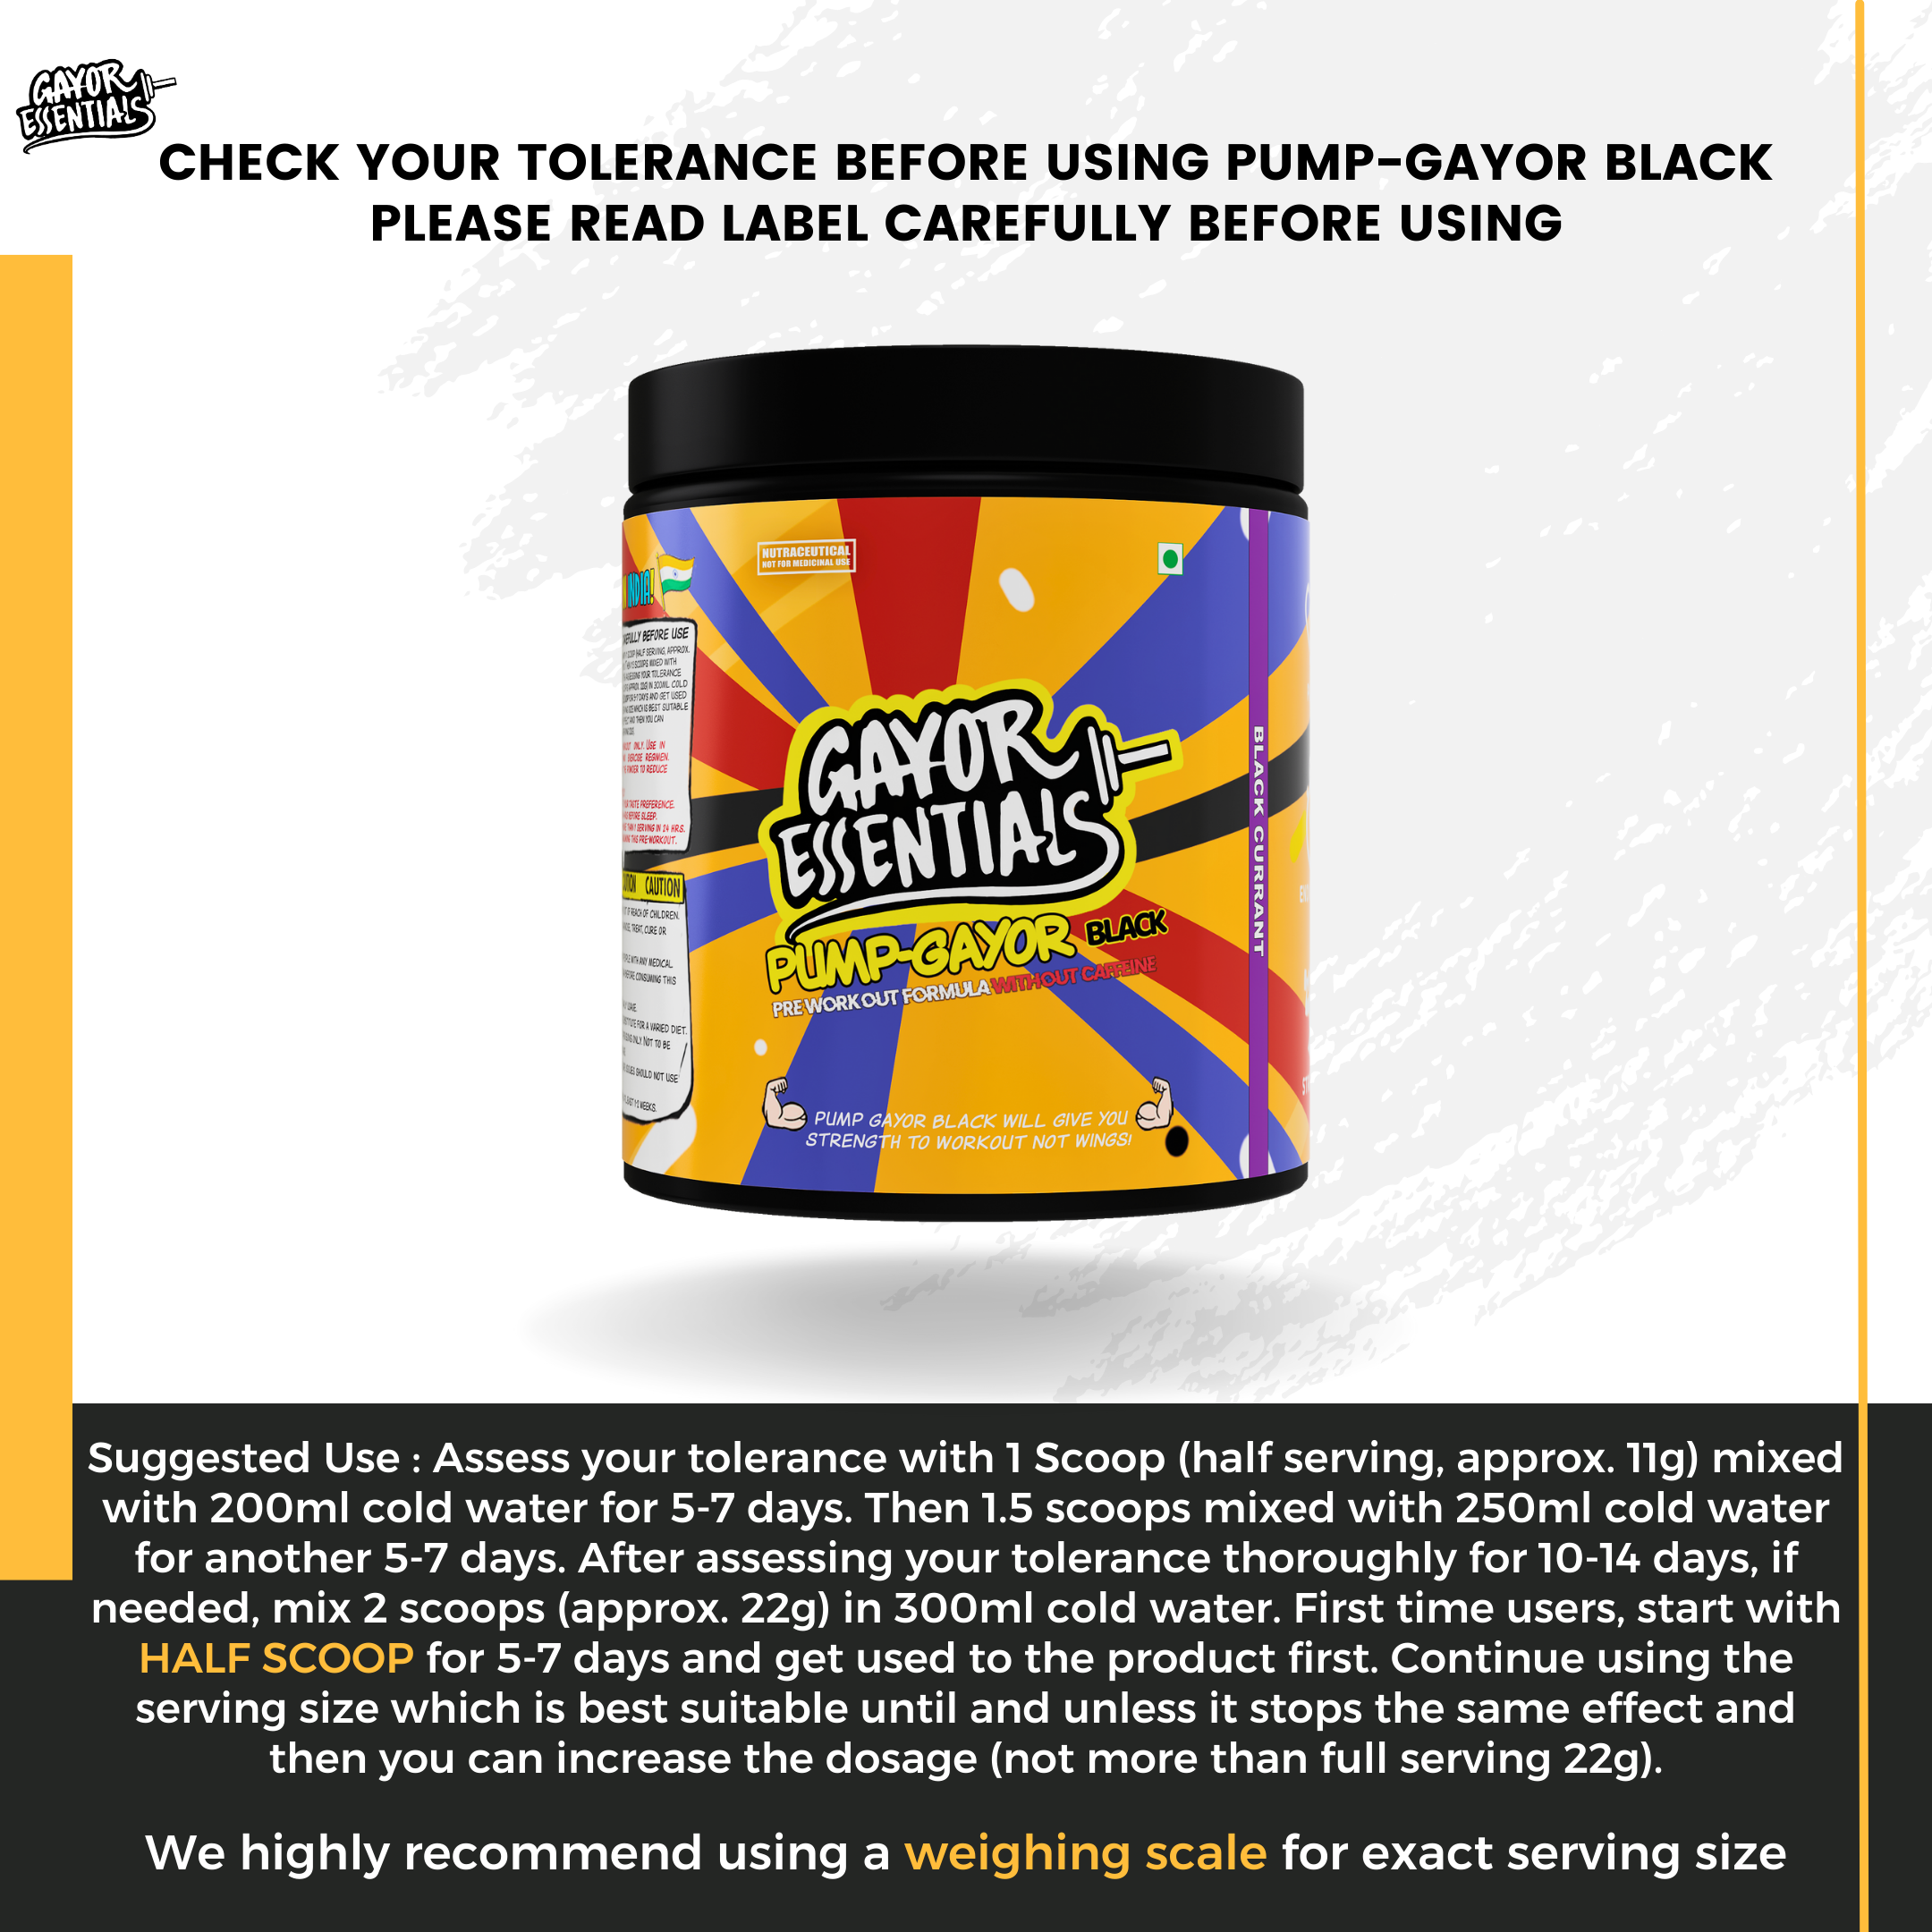 Pump-Gayor Black Small Pack (without caffeine)